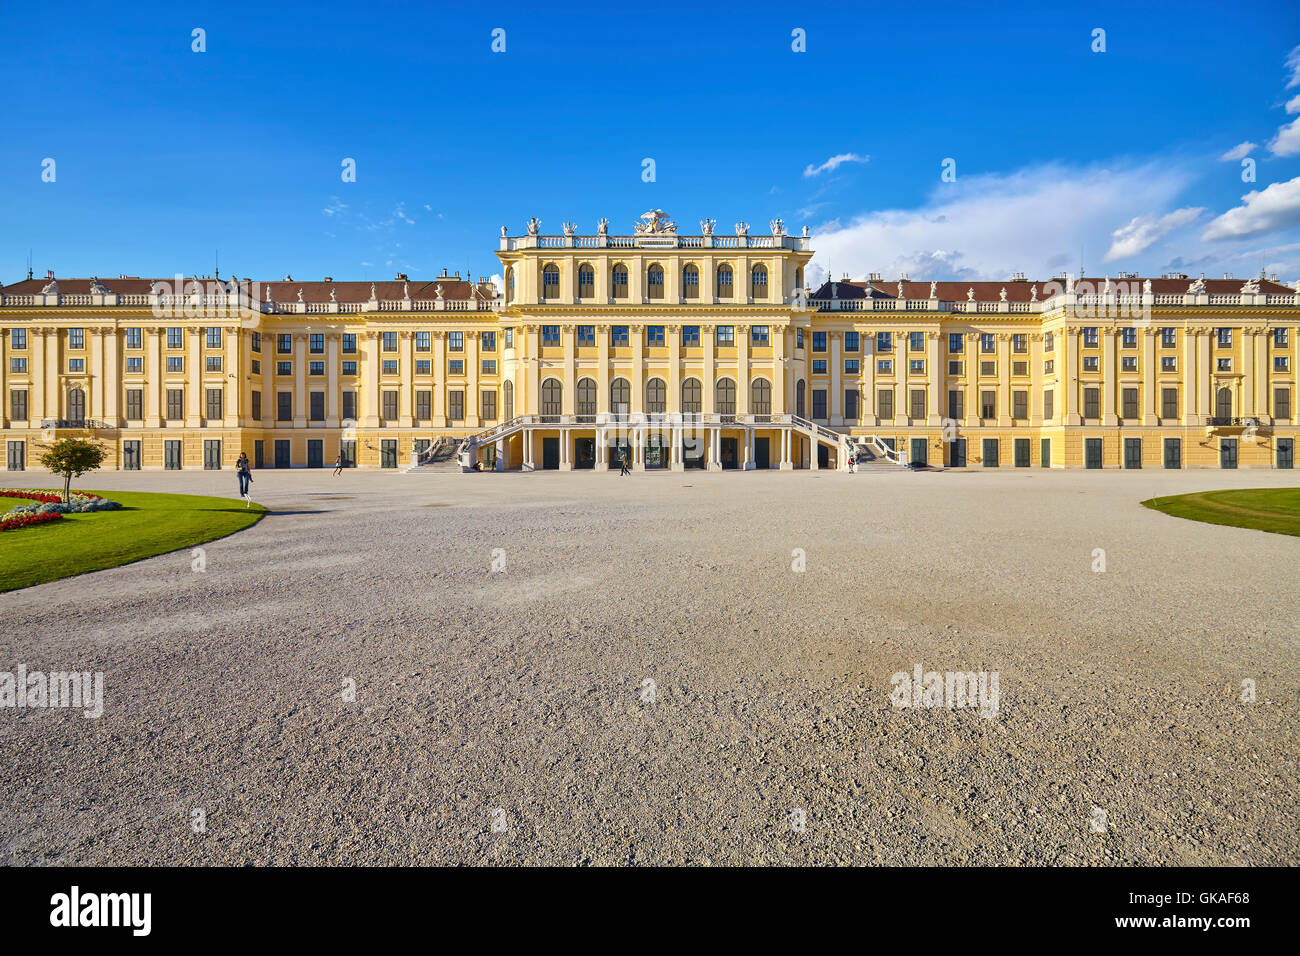 Front view of the Schonbrunn Palace. Stock Photo